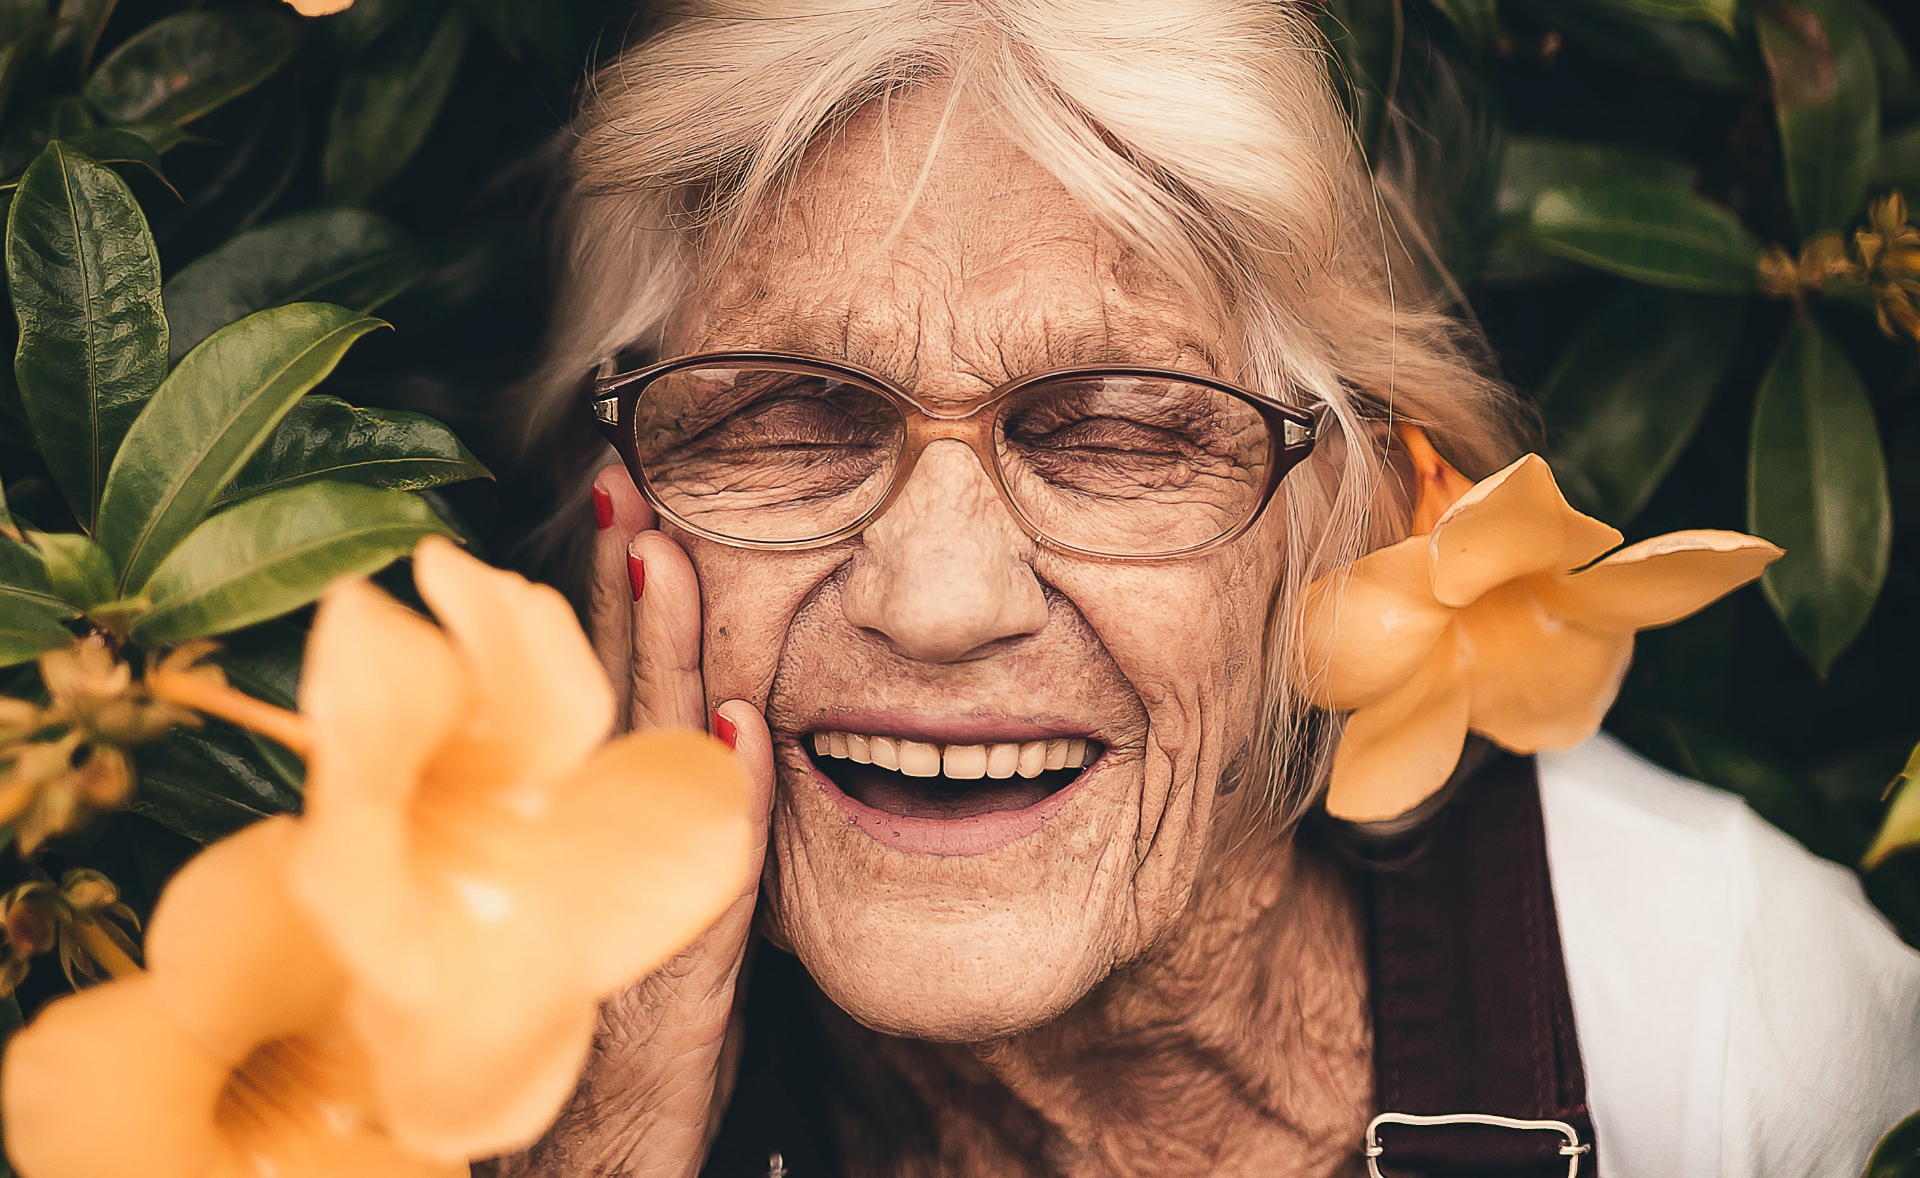 Elderly lady surrounded by greenery and orange flowers